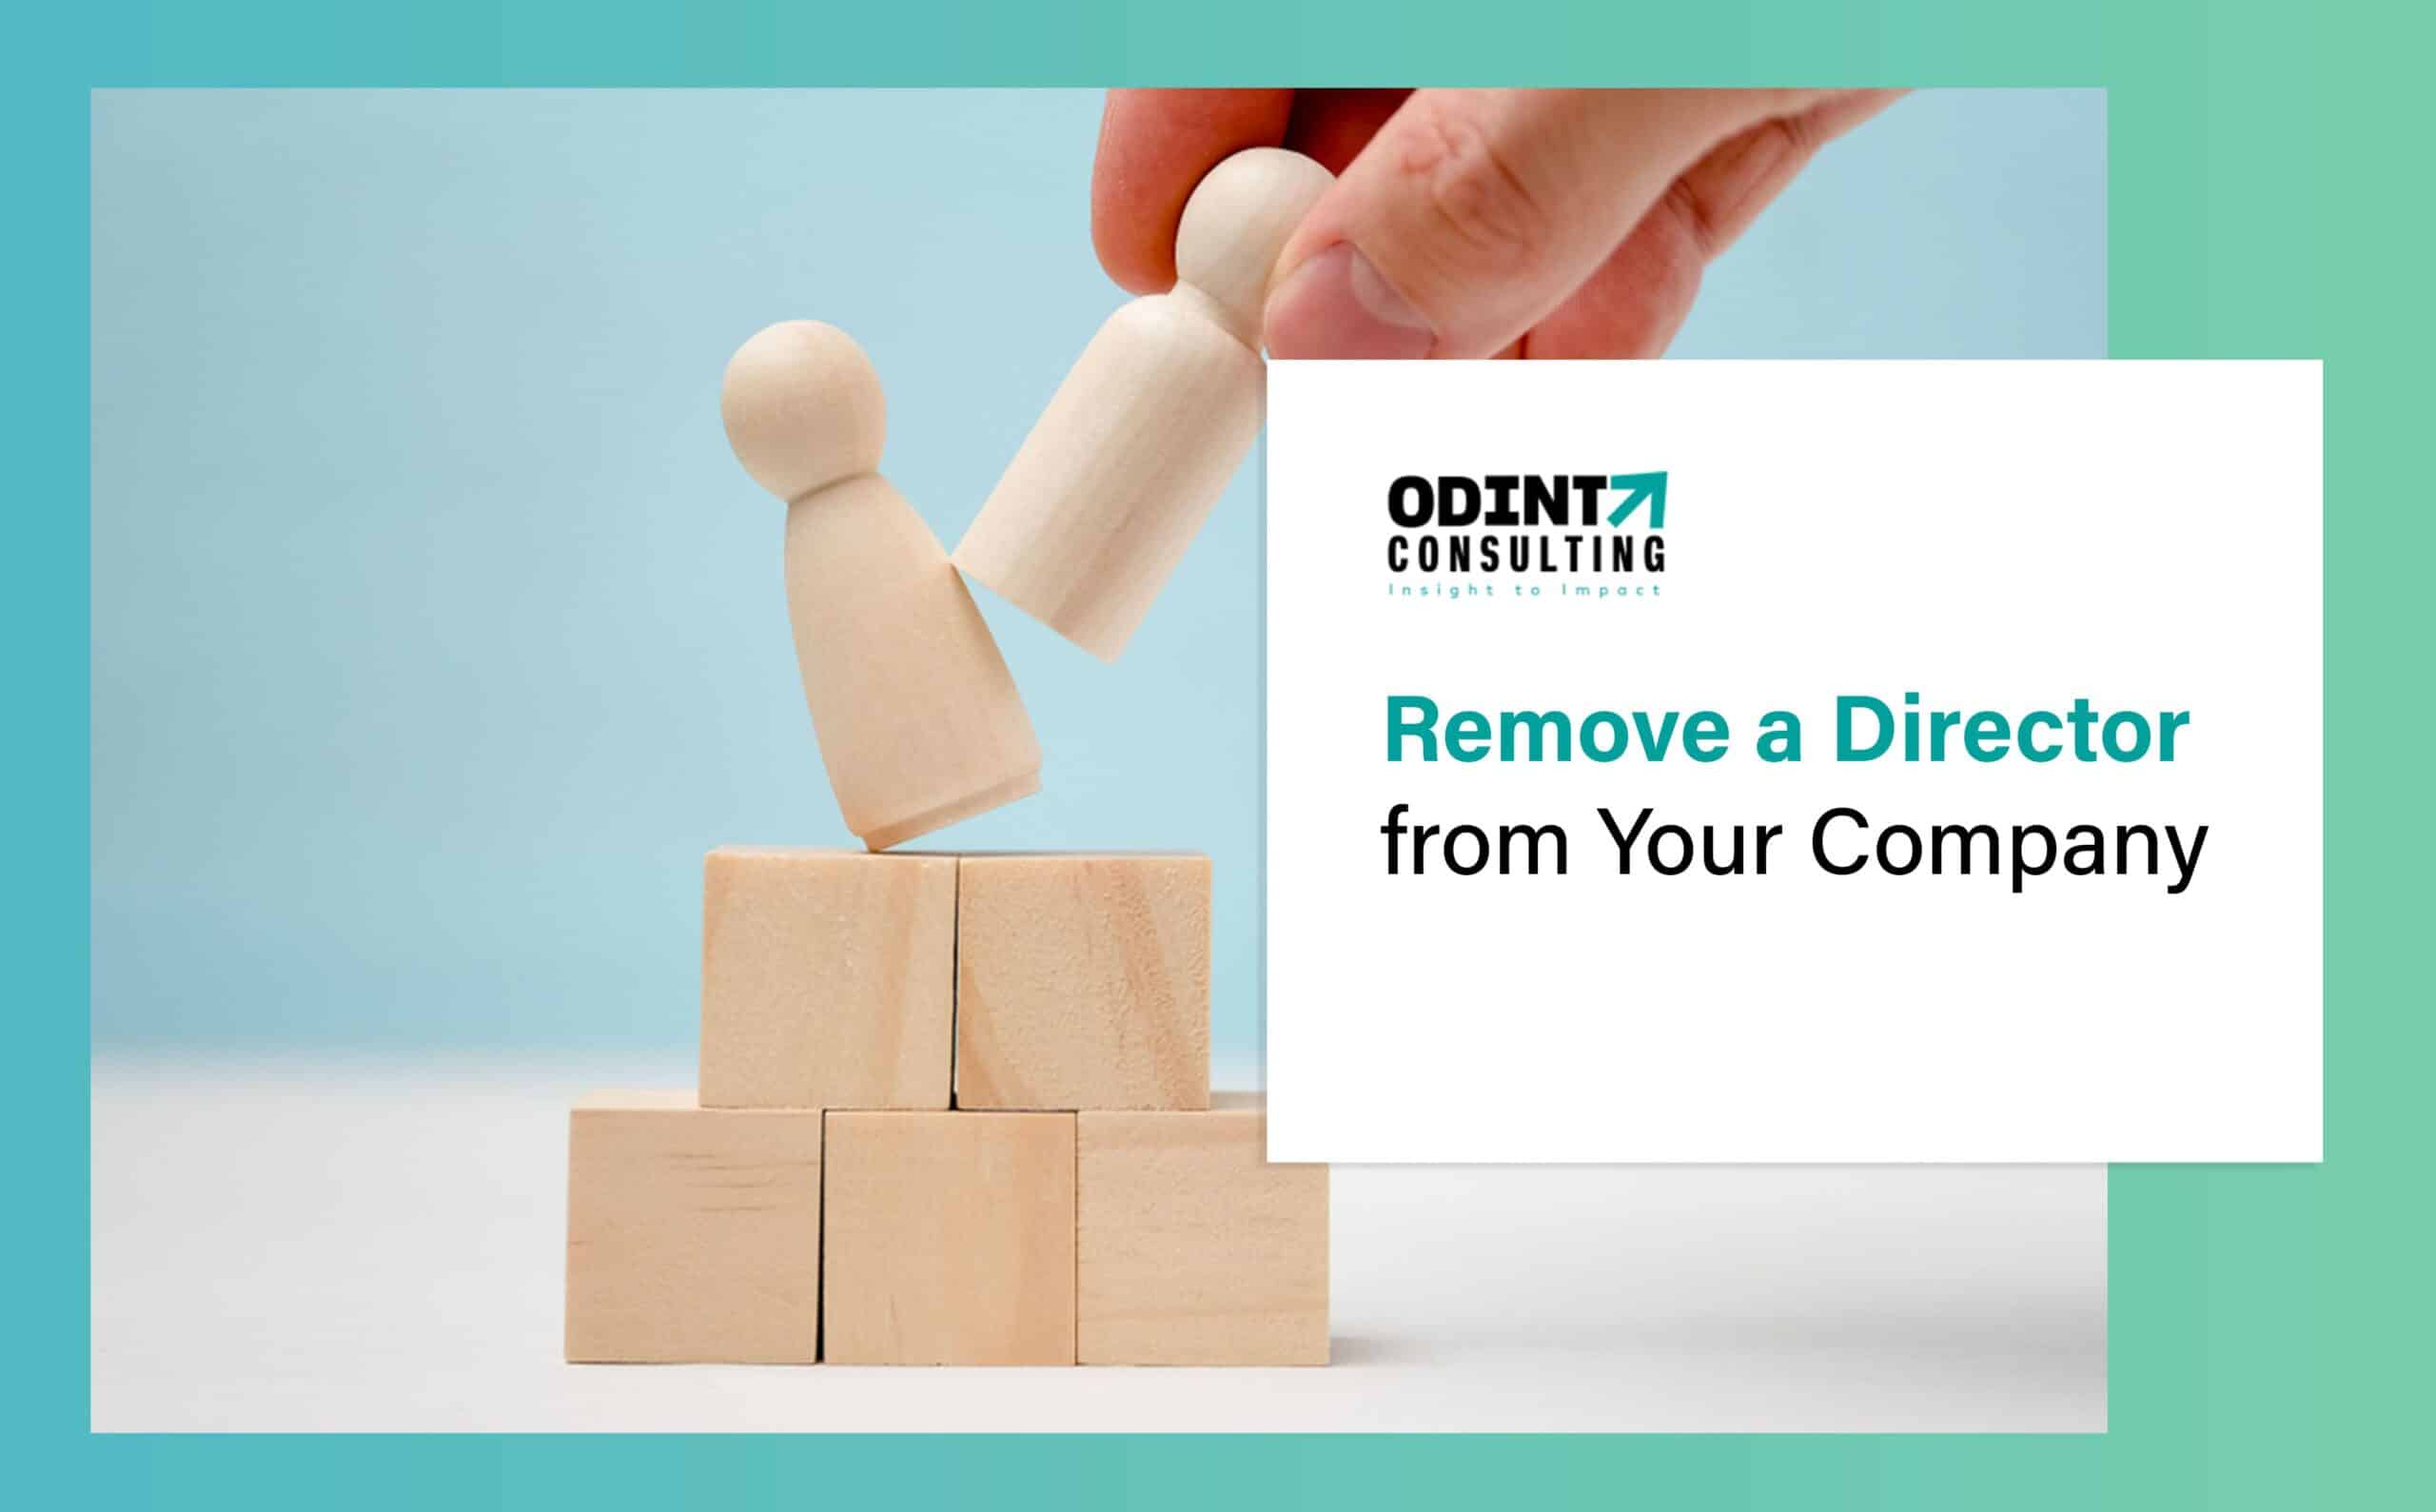 Remove a Director from Your Company 2022: Motives, Ways & Consequences Explained